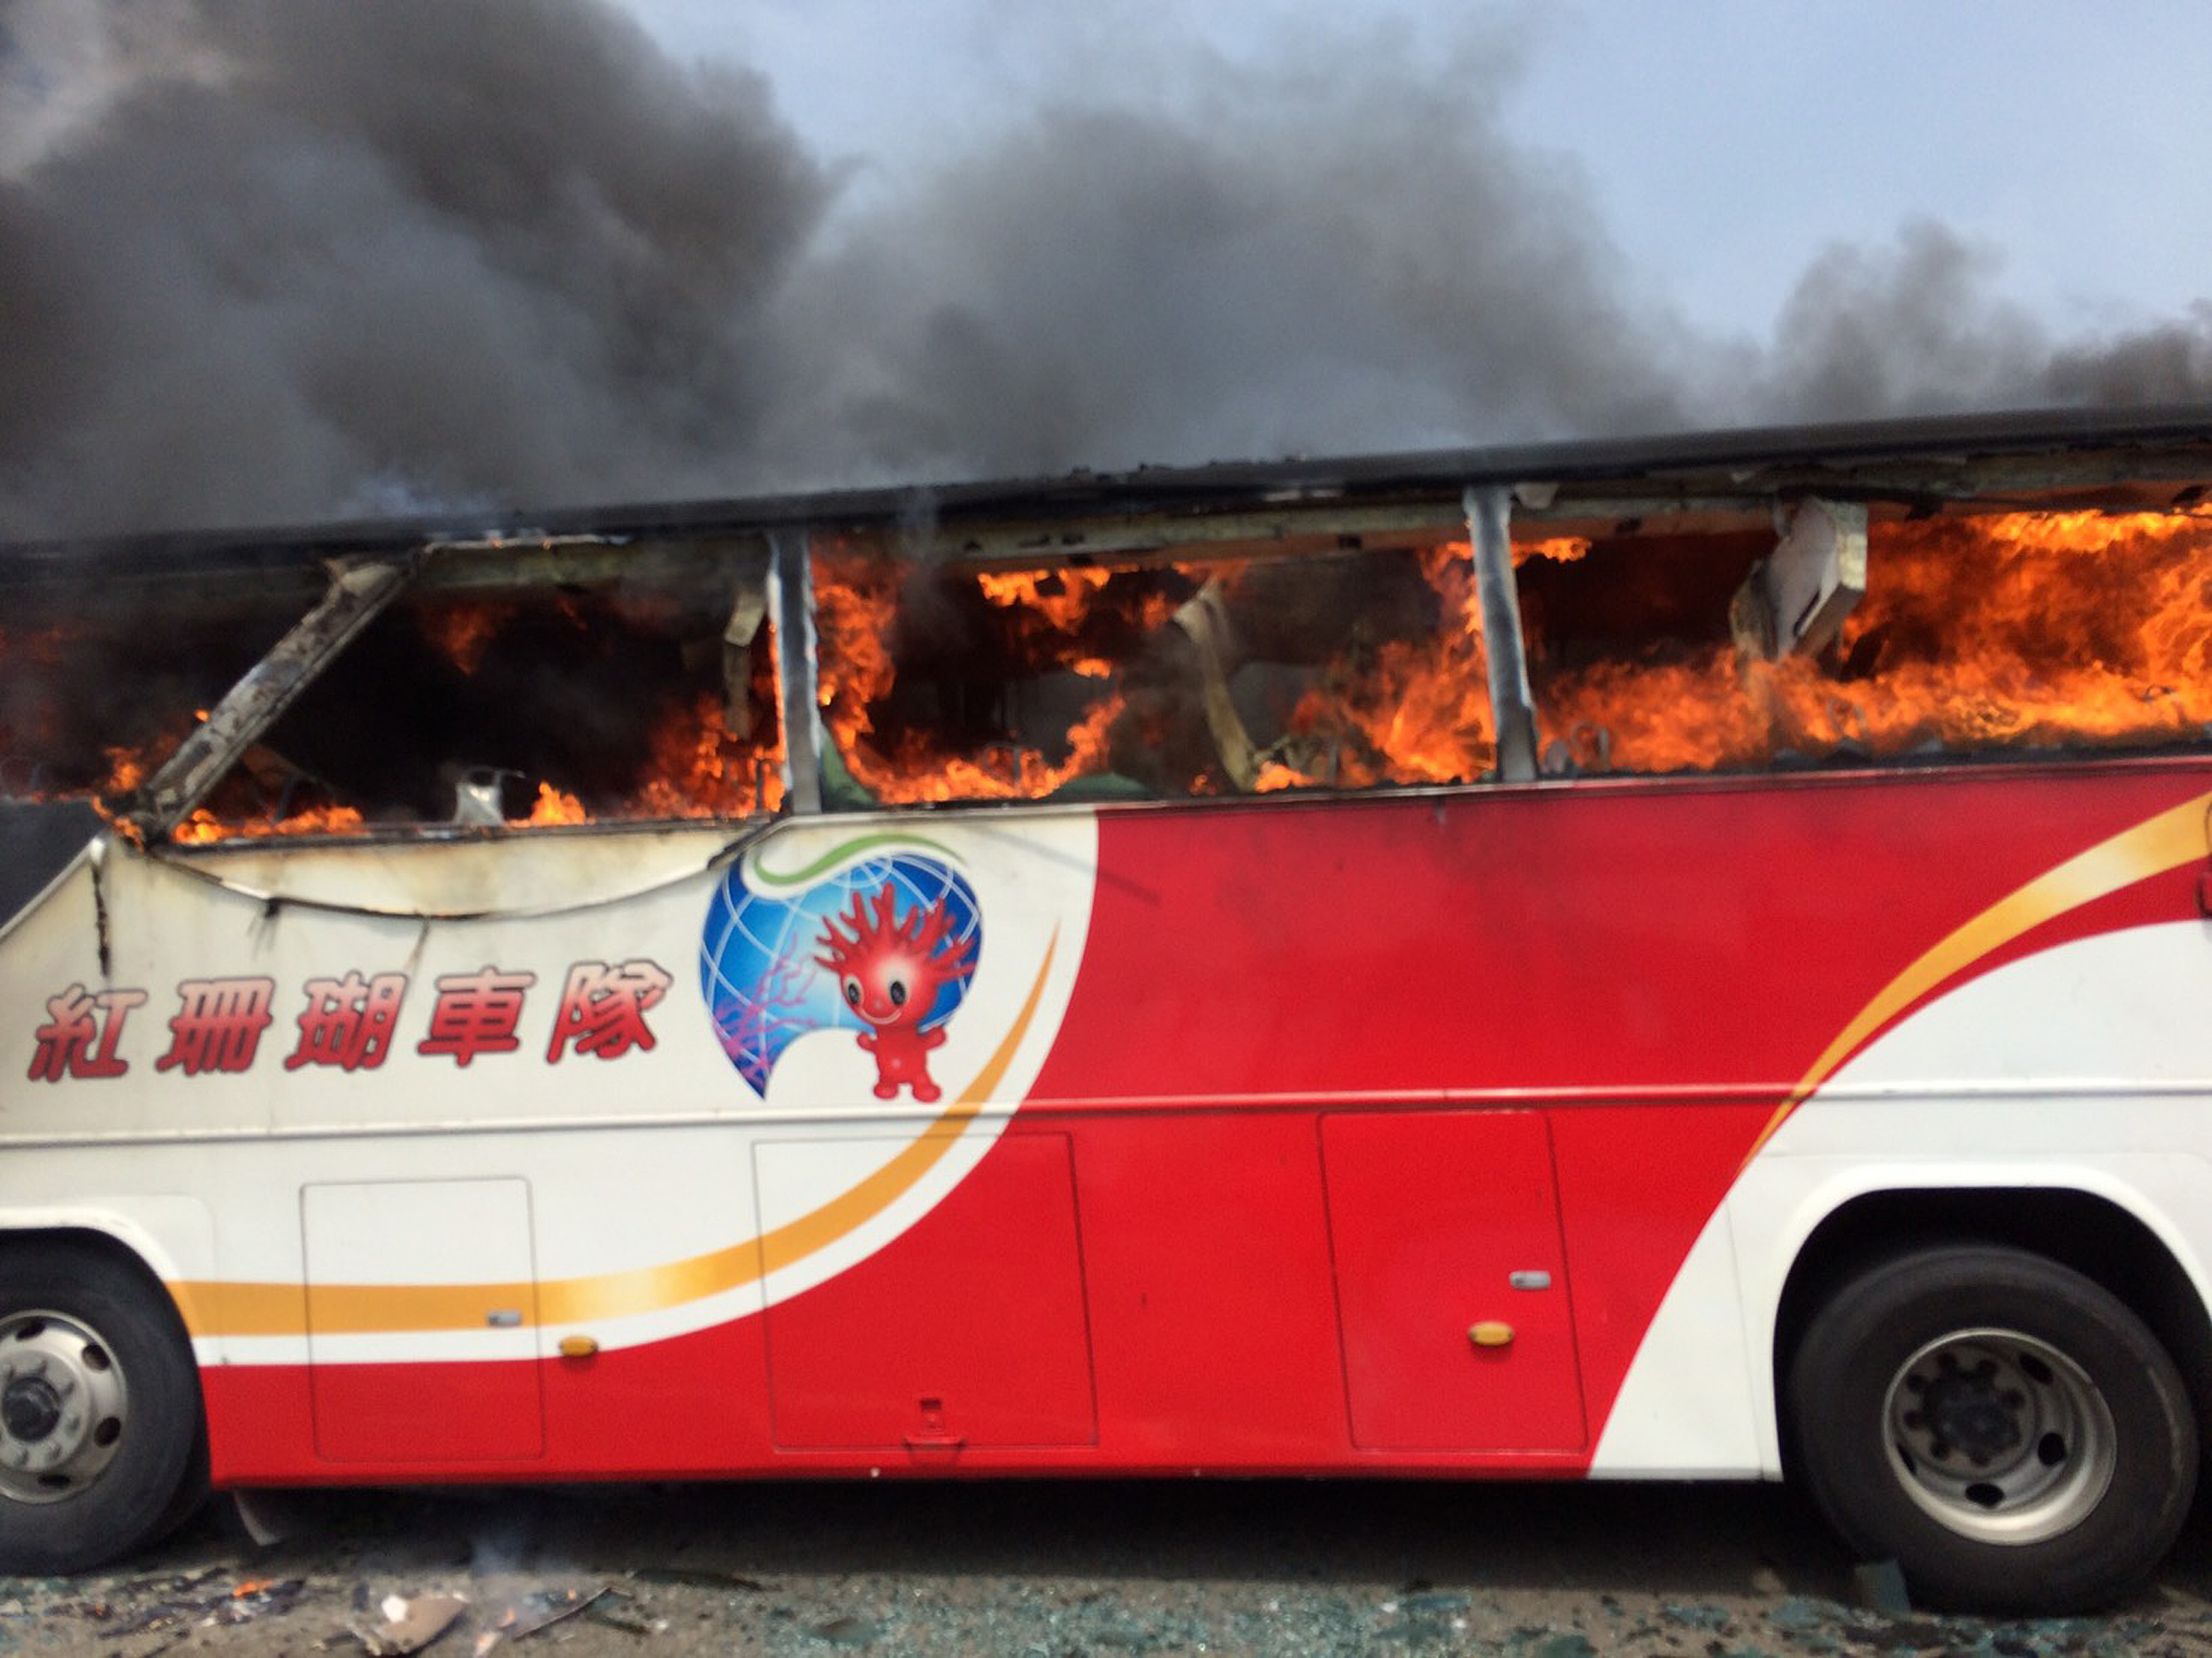 This handout photo taken and released by the Taoyuan City Fire Department on July 19, 2016 shows a bus carrying tourists from mainland China on fire after it crashed along an expressway on its way to the airport in Taiwan's city of Taoyuan on July 19, 2016. The Taiwan tour bus carrying visitors from mainland China crashed and caught fire on July 19 near the capital Taipei, killing 26 on board.  / AFP PHOTO / TAOYUAN CITY FIRE DEPARTMENT / TAOYUAN CITY FIRE DEPARTMENT / -----EDITORS NOTE --- RESTRICTED TO EDITORIAL USE - MANDATORY CREDIT "AFP PHOTO / TAOYUAN CITY FIRE DEPARTMENT" - NO MARKETING - NO ADVERTISING CAMPAIGNS - DISTRIBUTED AS A SERVICE TO CLIENTS - NO ARCHIVES